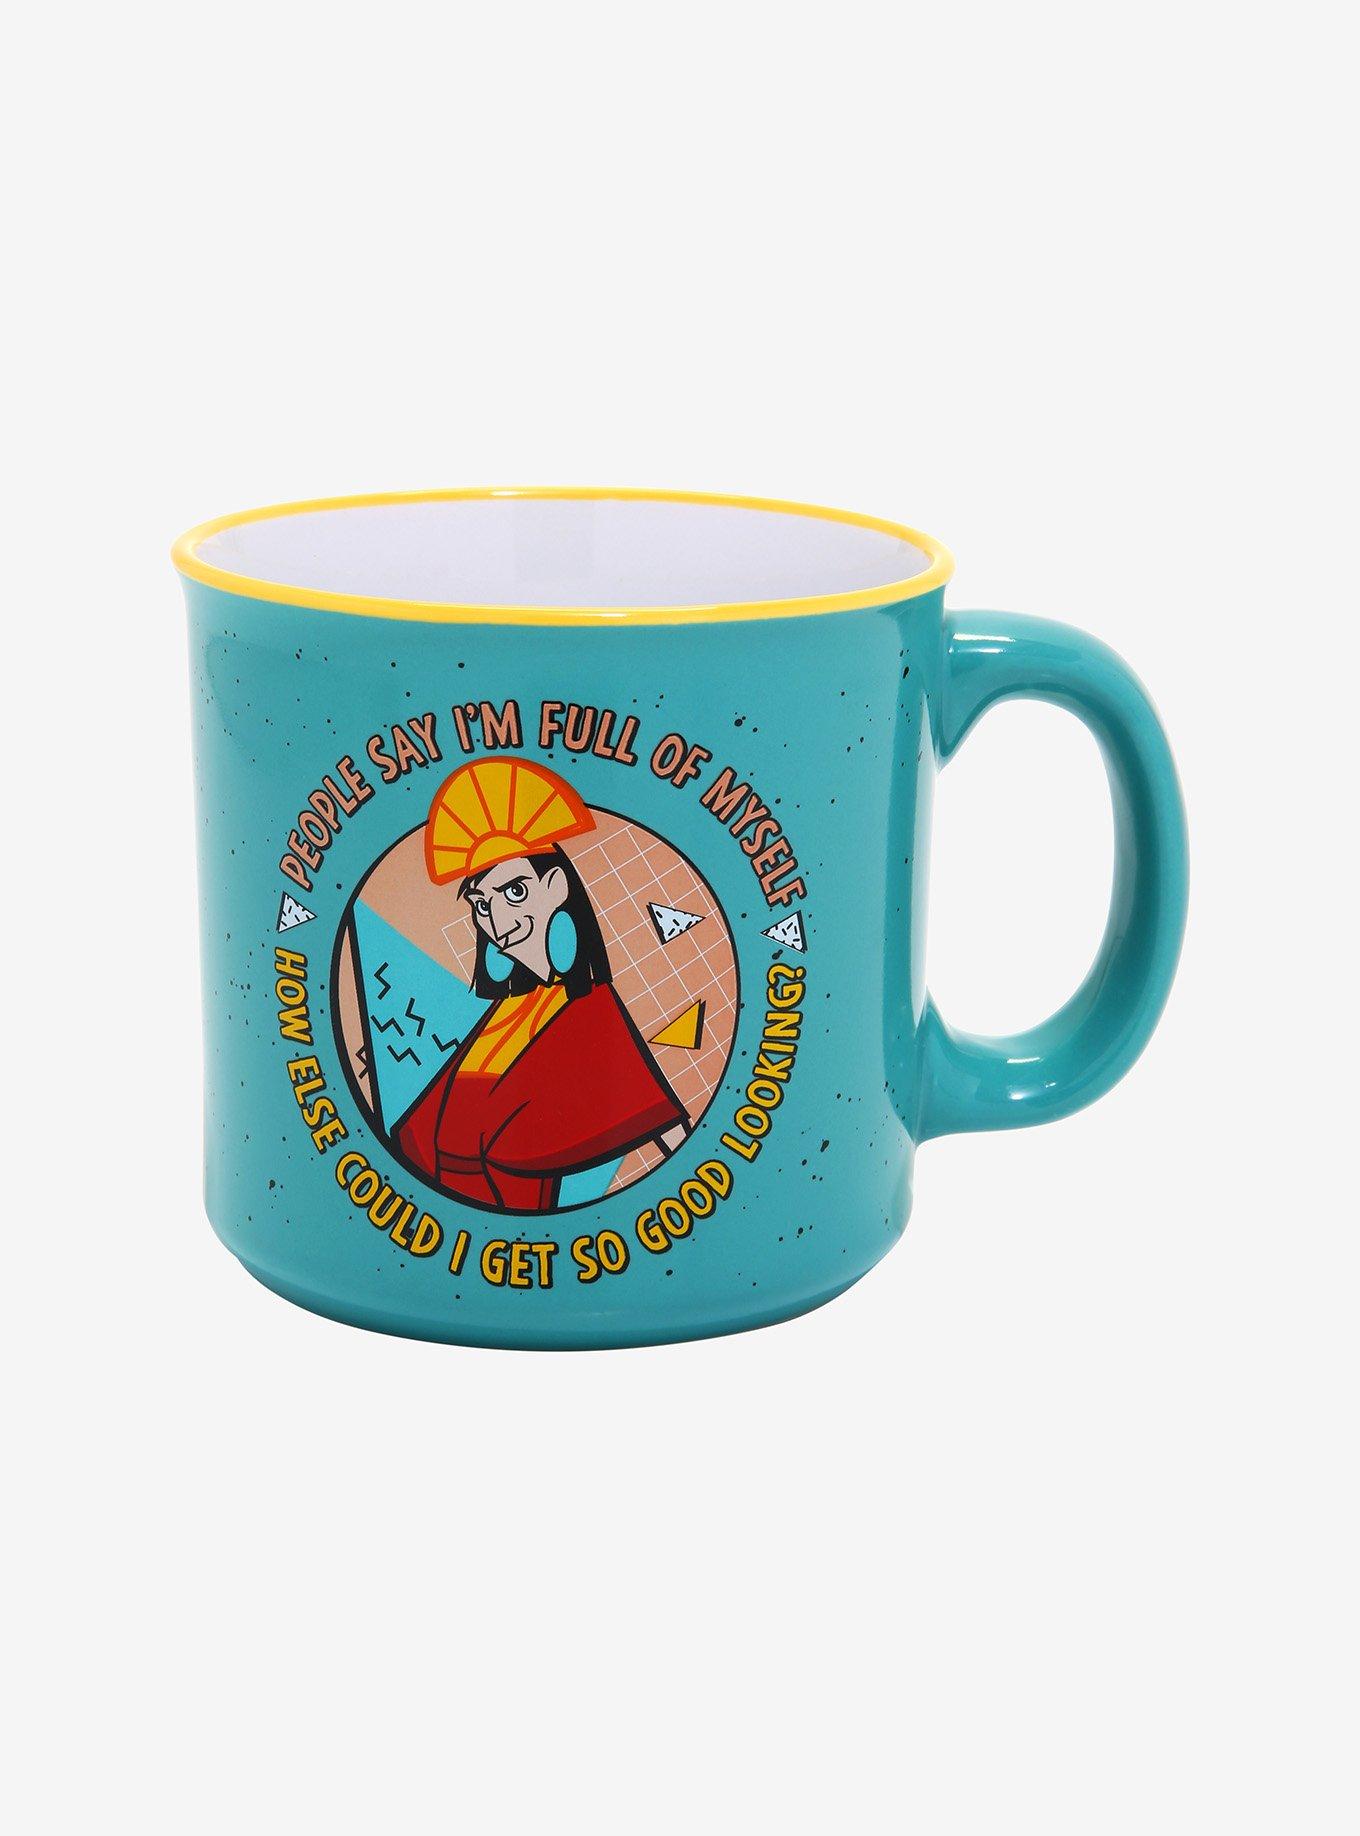 Disney Just Released 6 NEW Mugs (And Some Are Kinda Creepy